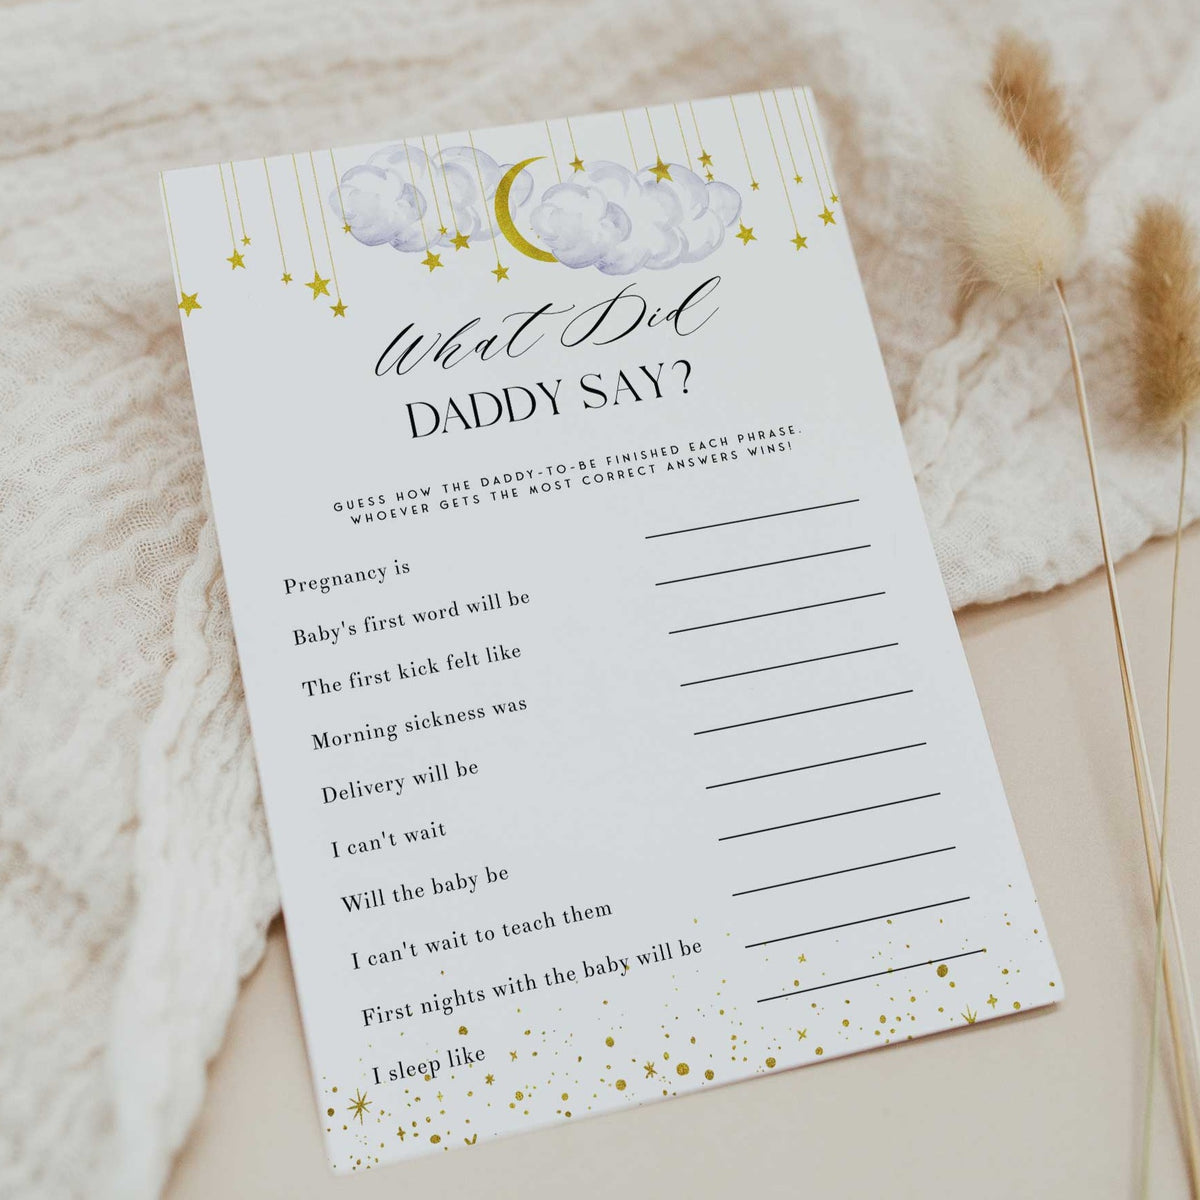 Fully editable and printable baby shower what did daddy say game with a little star design. Perfect for a Twinkle Little Star baby shower themed party